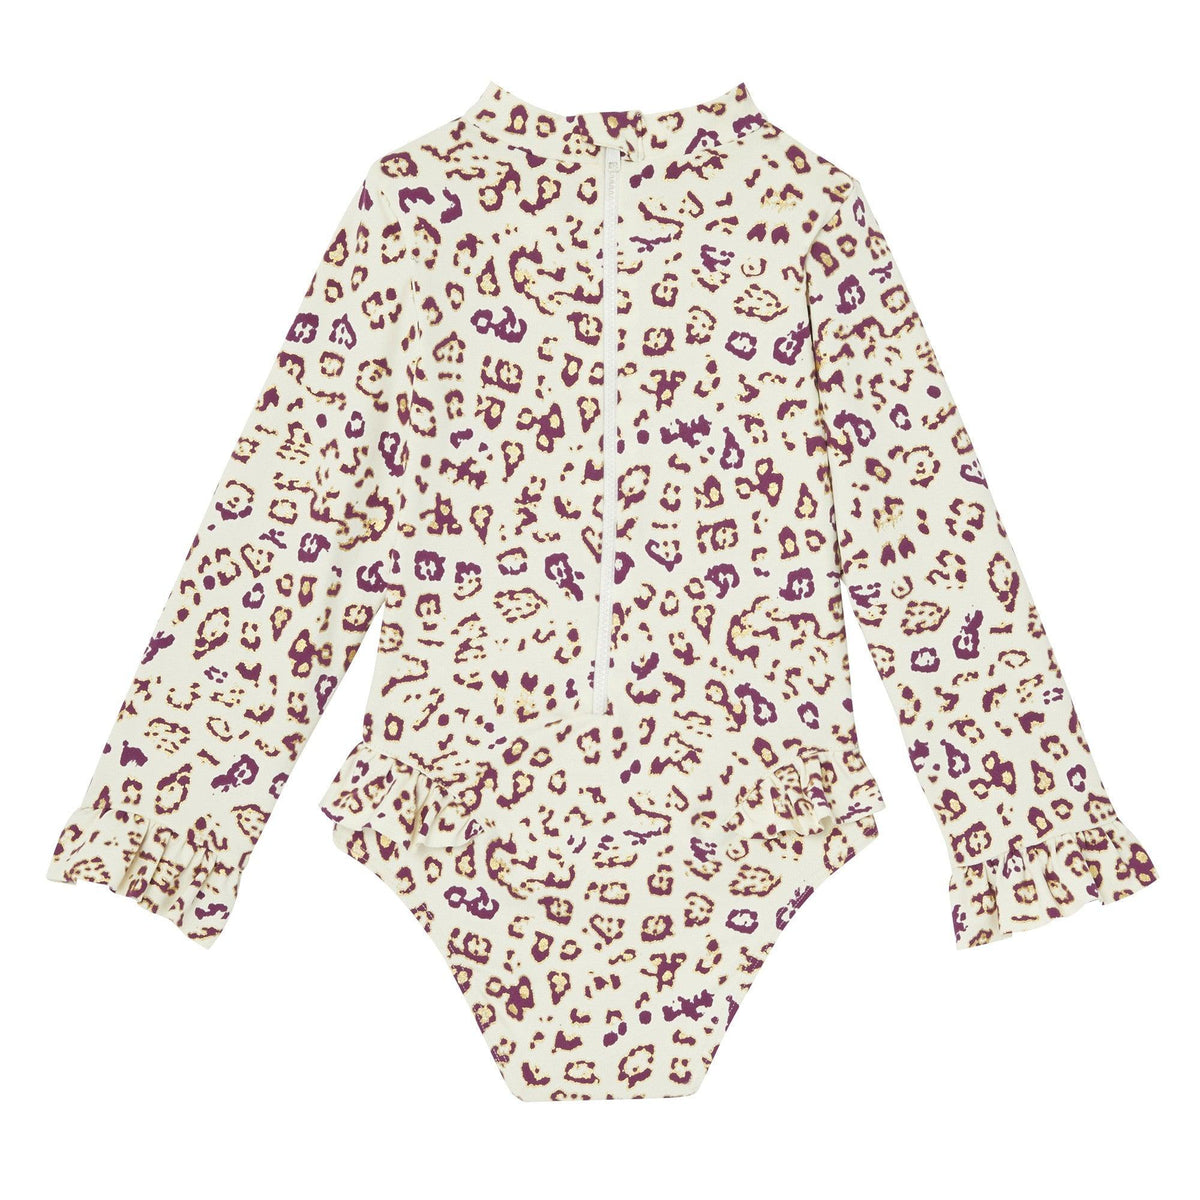 Long-sleeved leopard print baby girl swimming costume